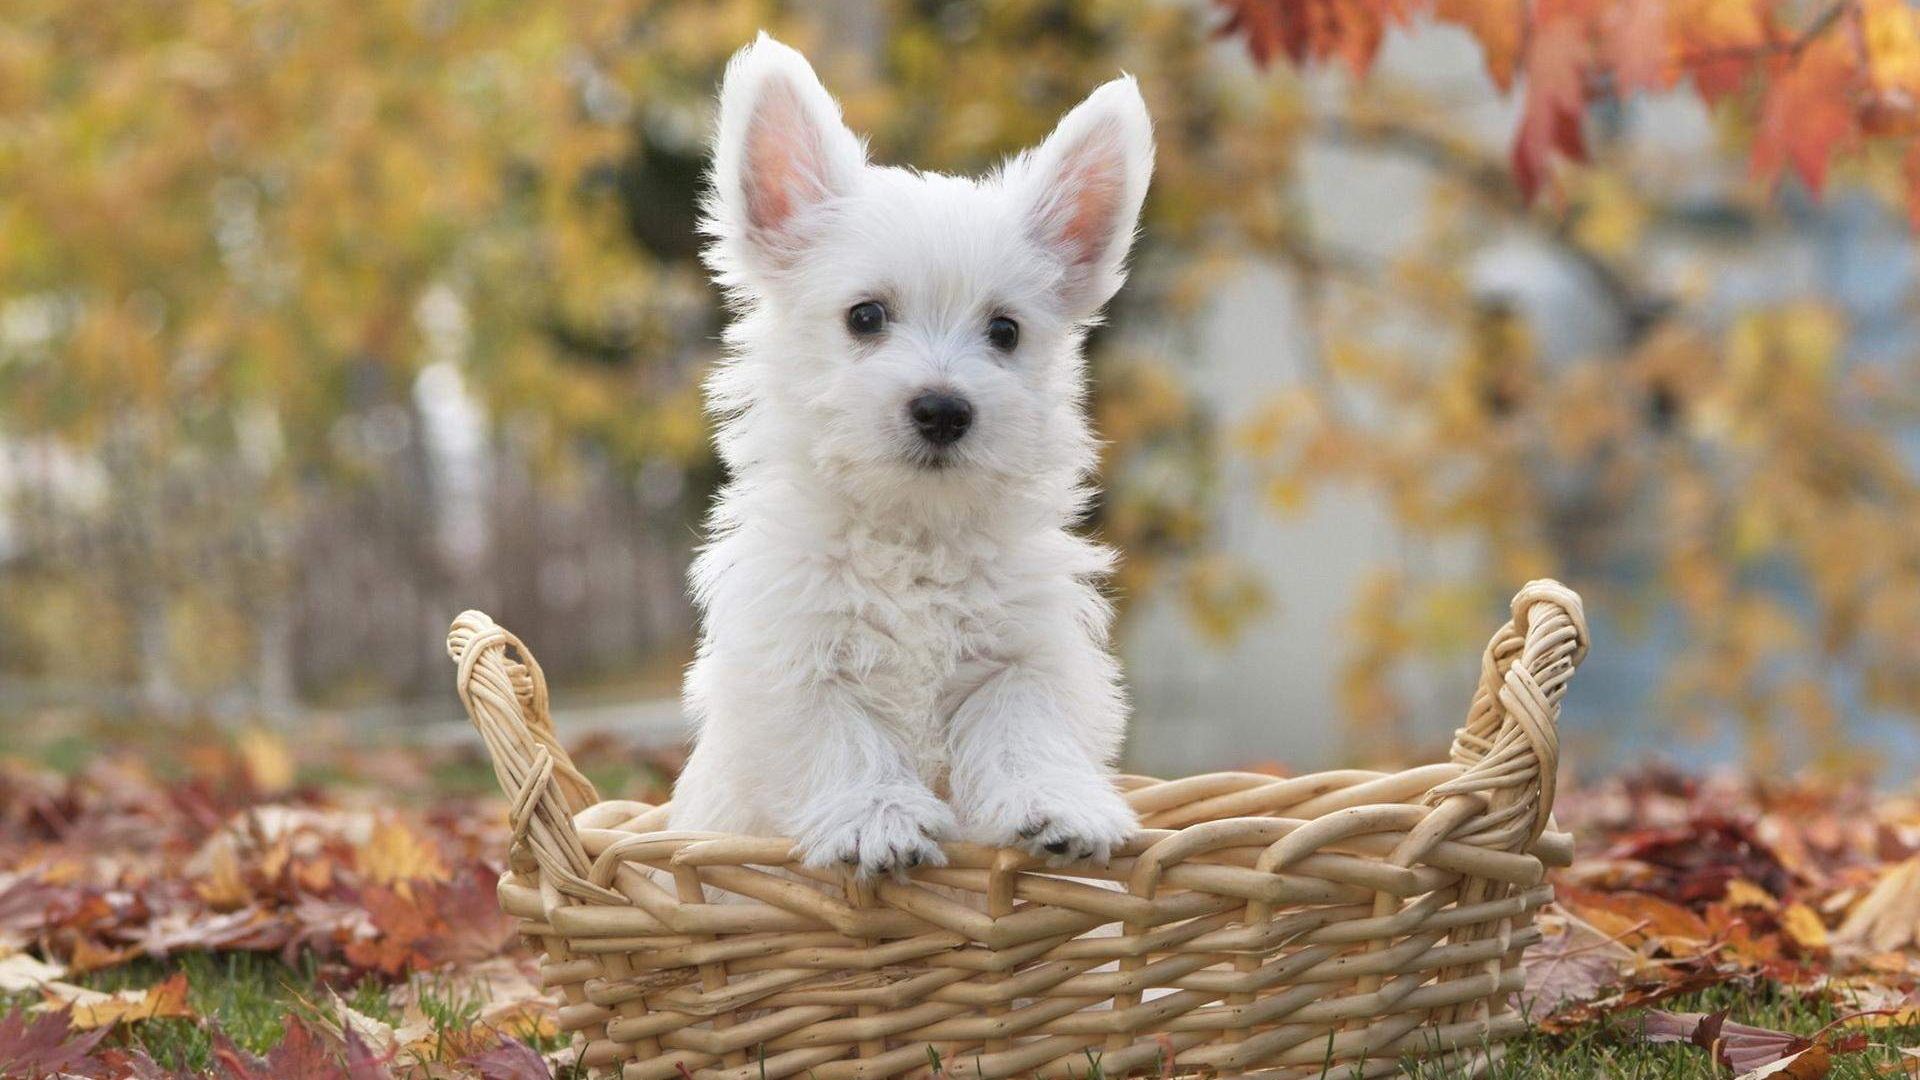 Desktop Wallpaper Cute Little White Dog Puppy, Hd Image, Picture,  Background, Wwr2ld